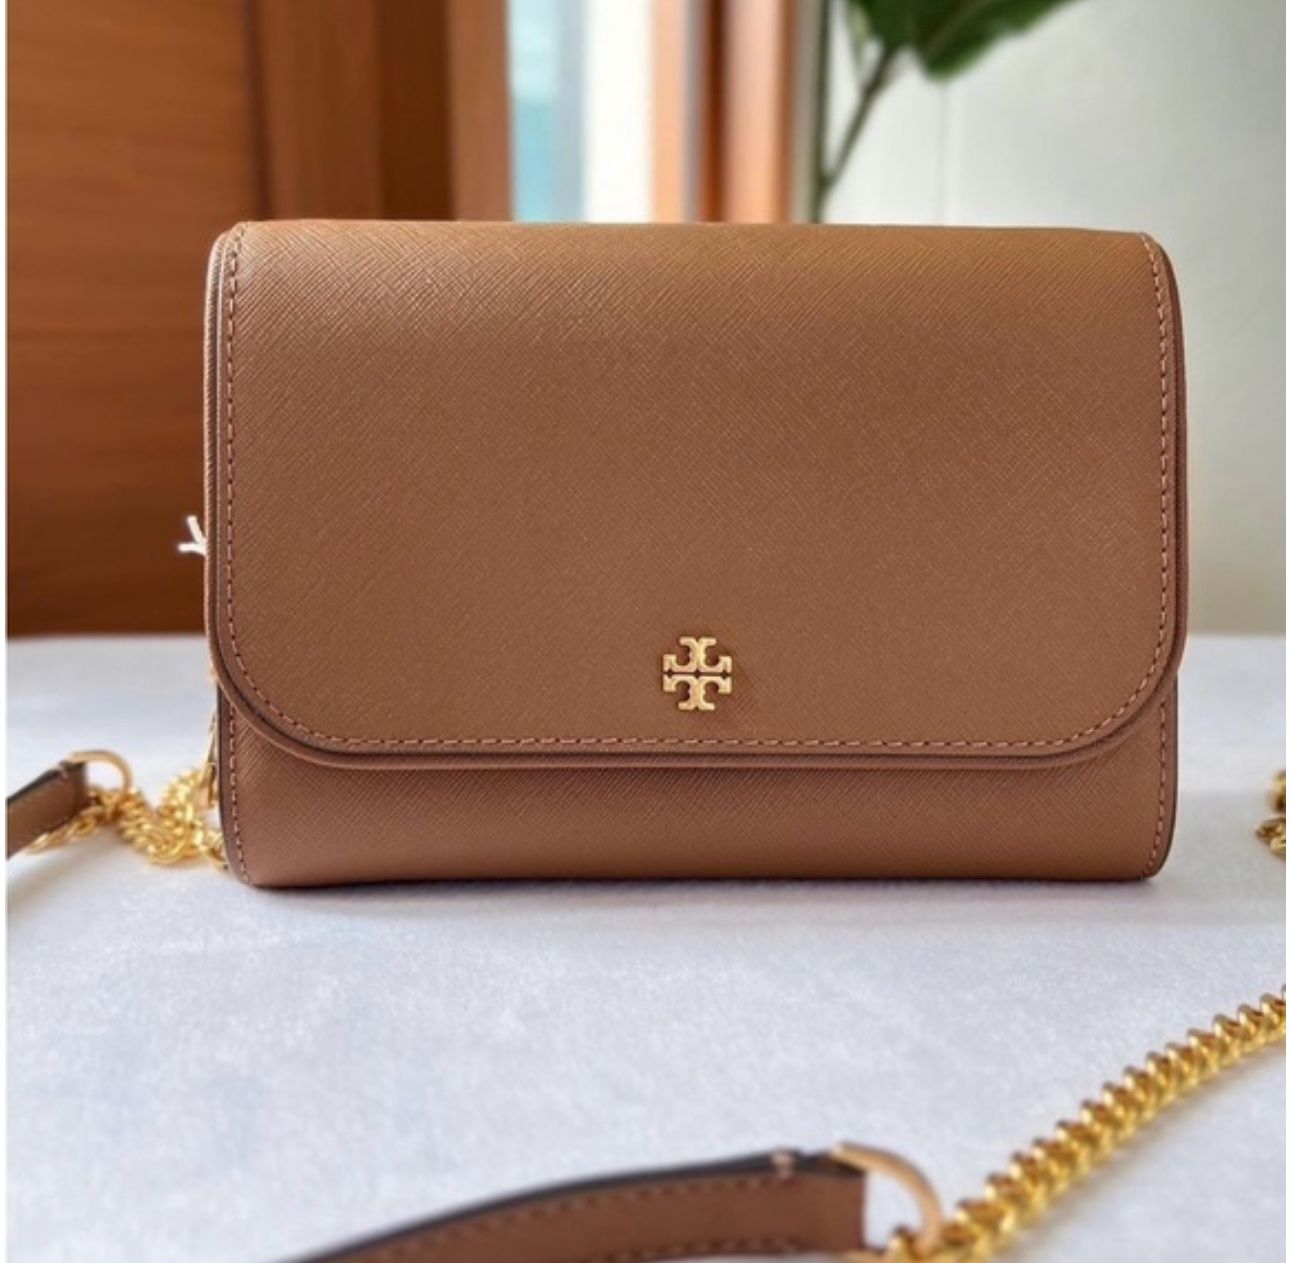 Brand New! 🌟 Tory Burch Chain Wallet - Moose